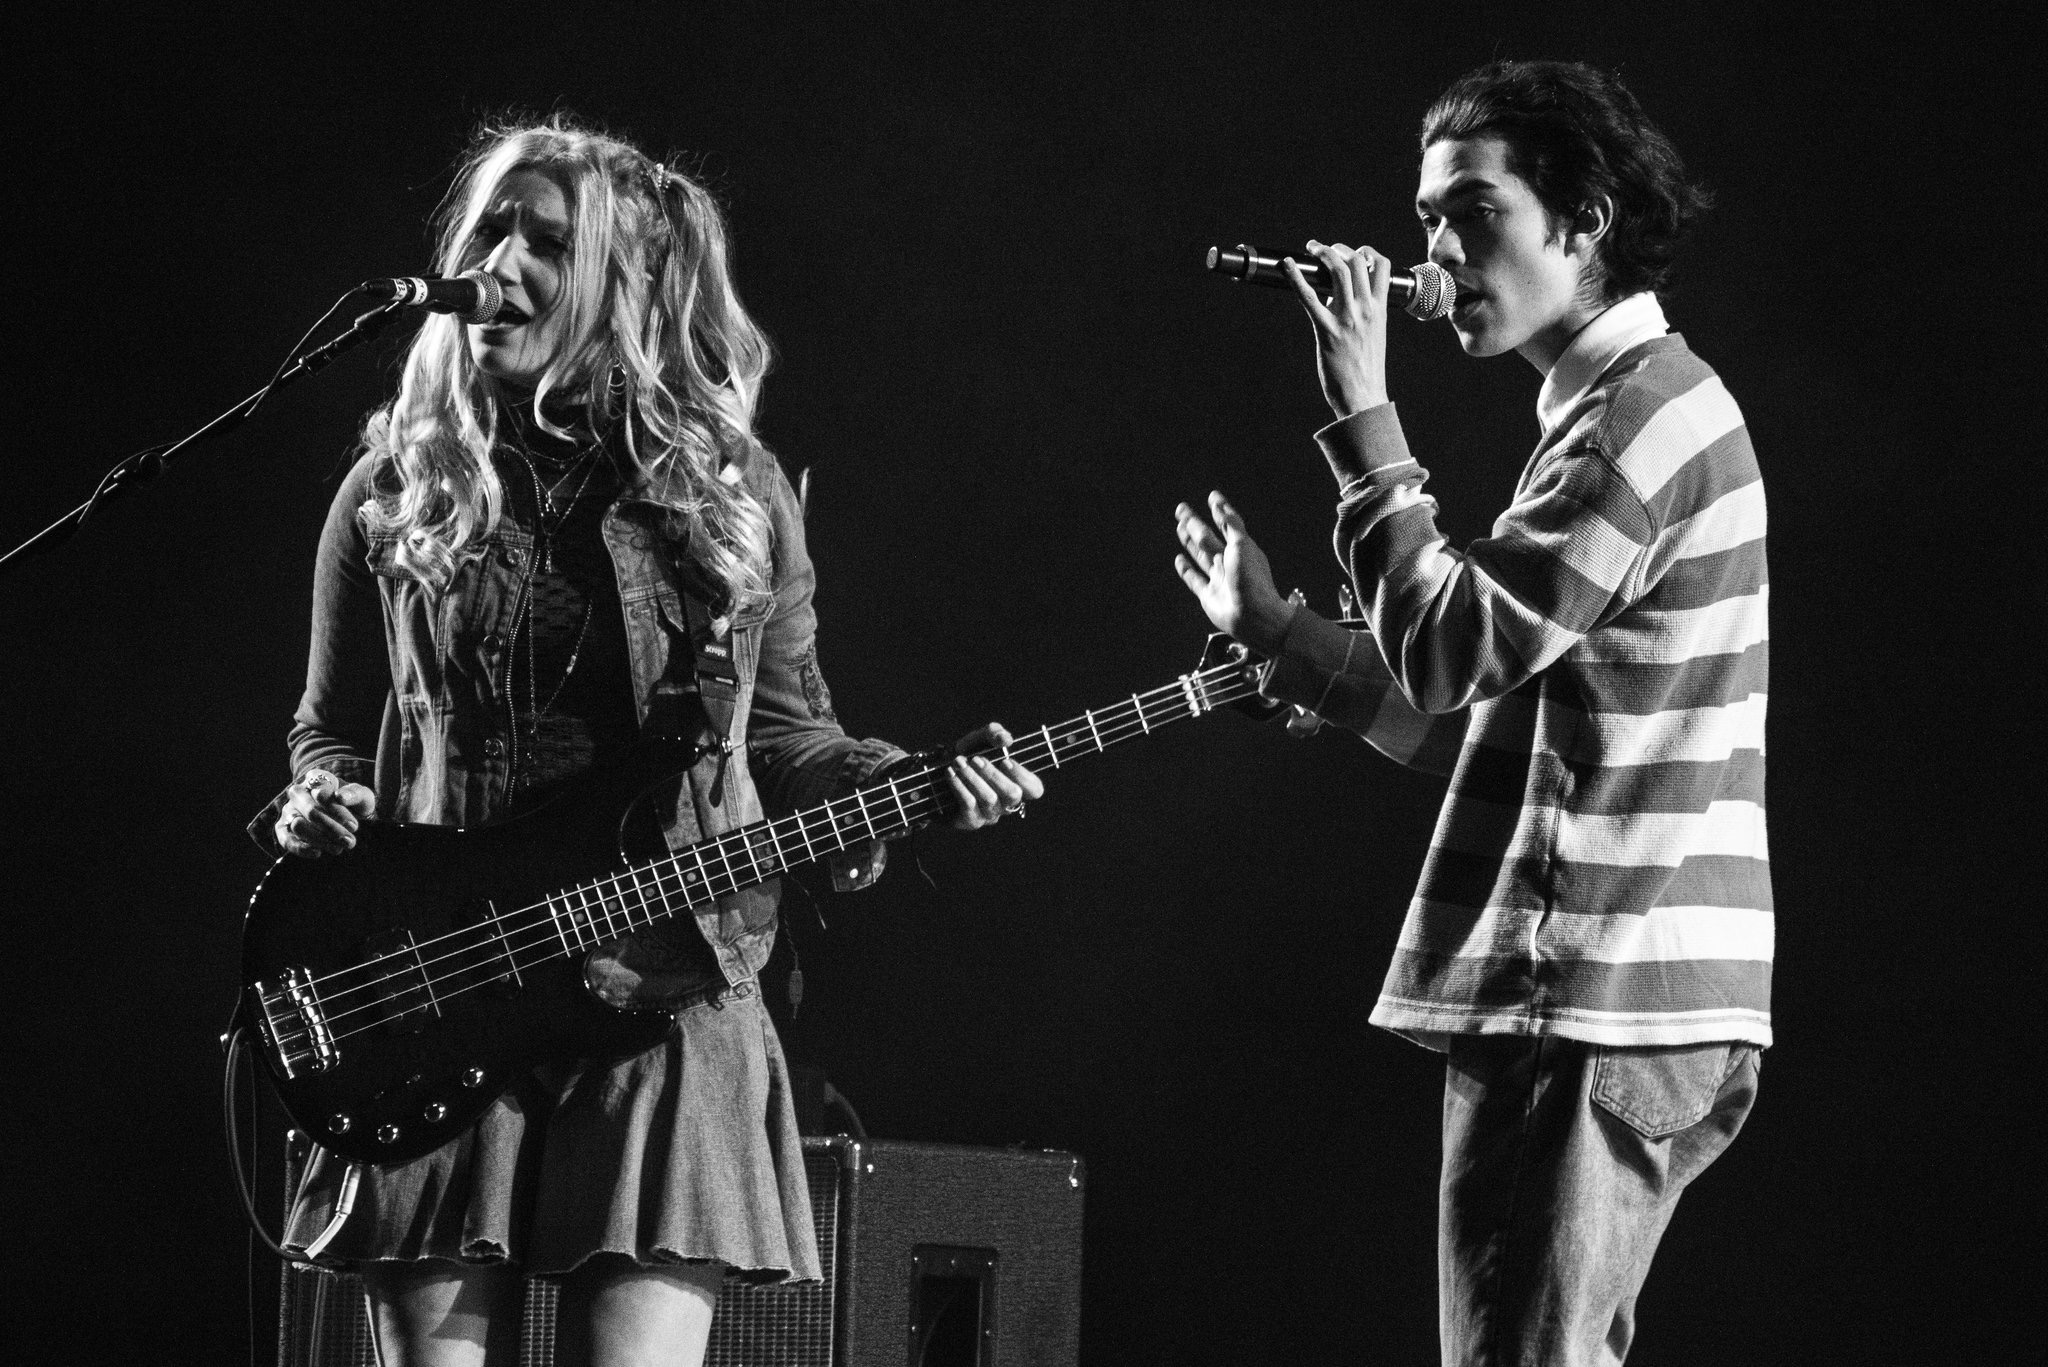 Christine Meisenhelter performing with Conan Gray on his national tour, 2019